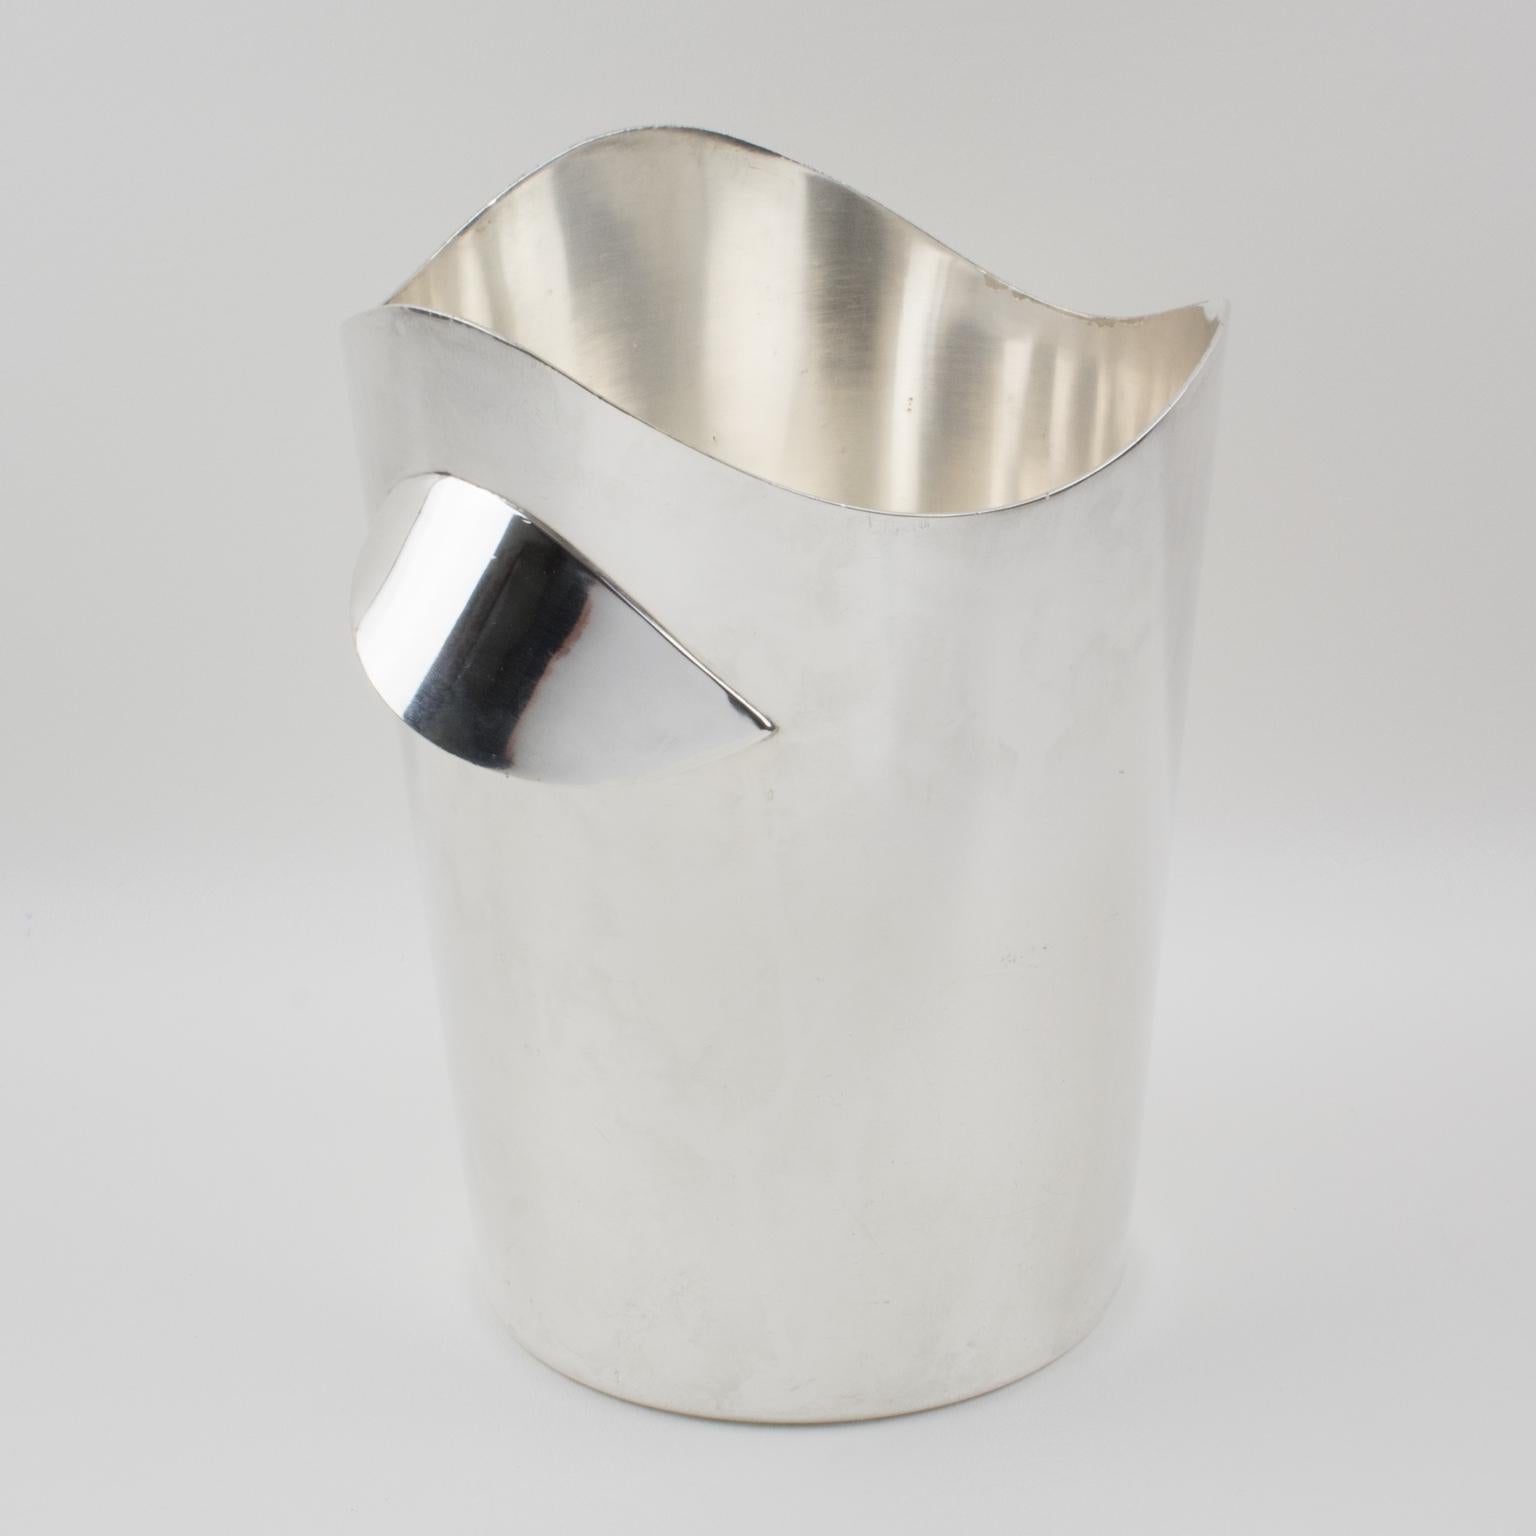 Wiskemann Modernist Silver Plate Champagne Ice Bucket Wine Cooler In Good Condition For Sale In Atlanta, GA